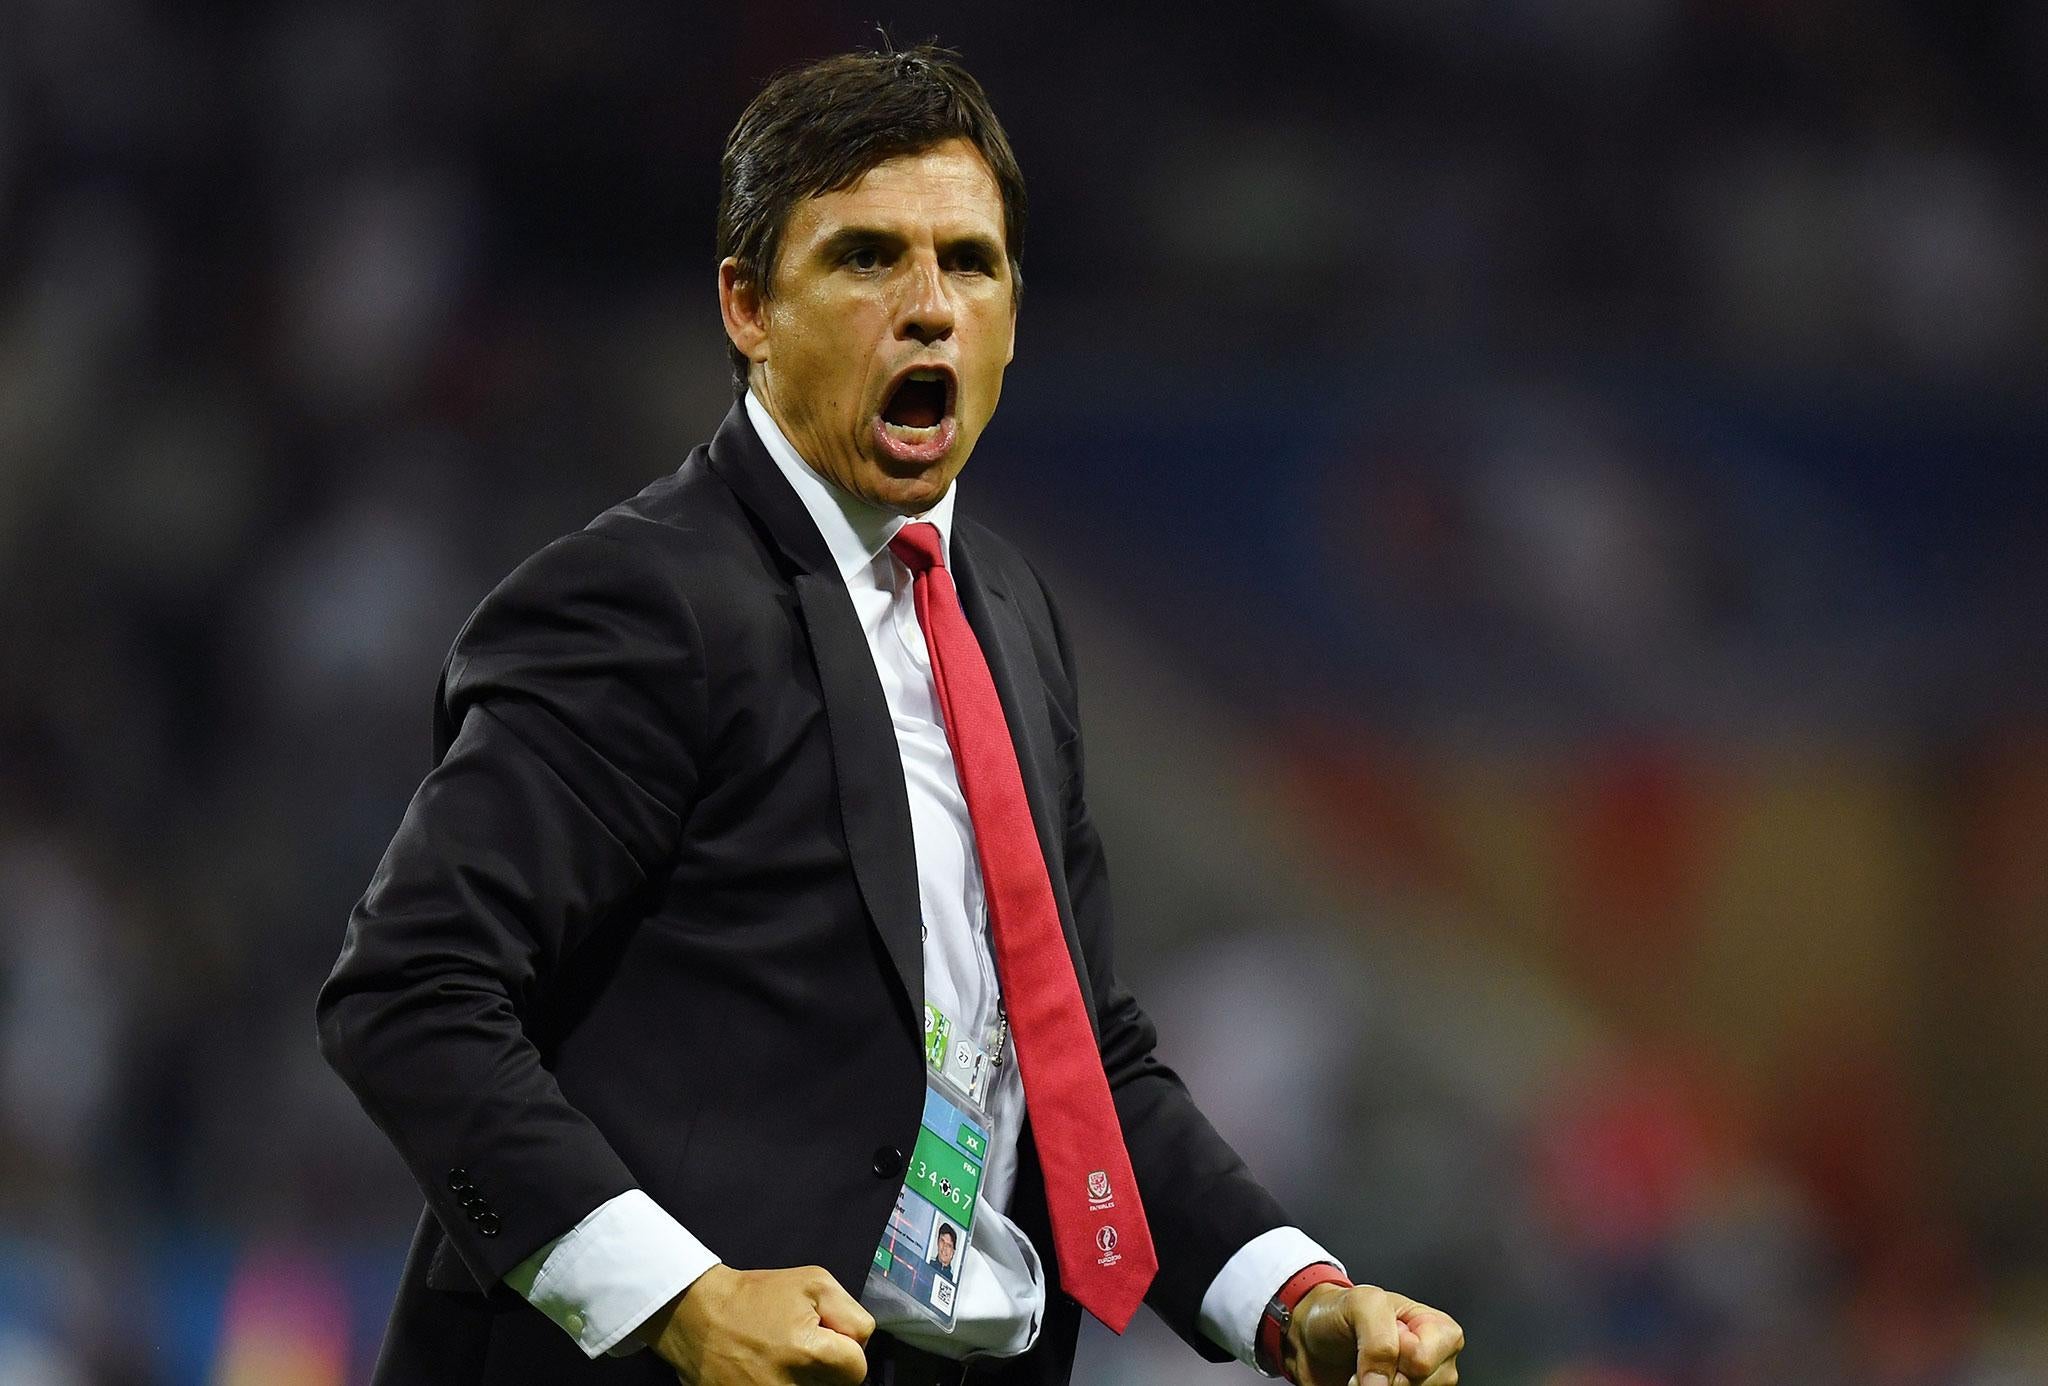 Coleman's team reached a new height against Russia